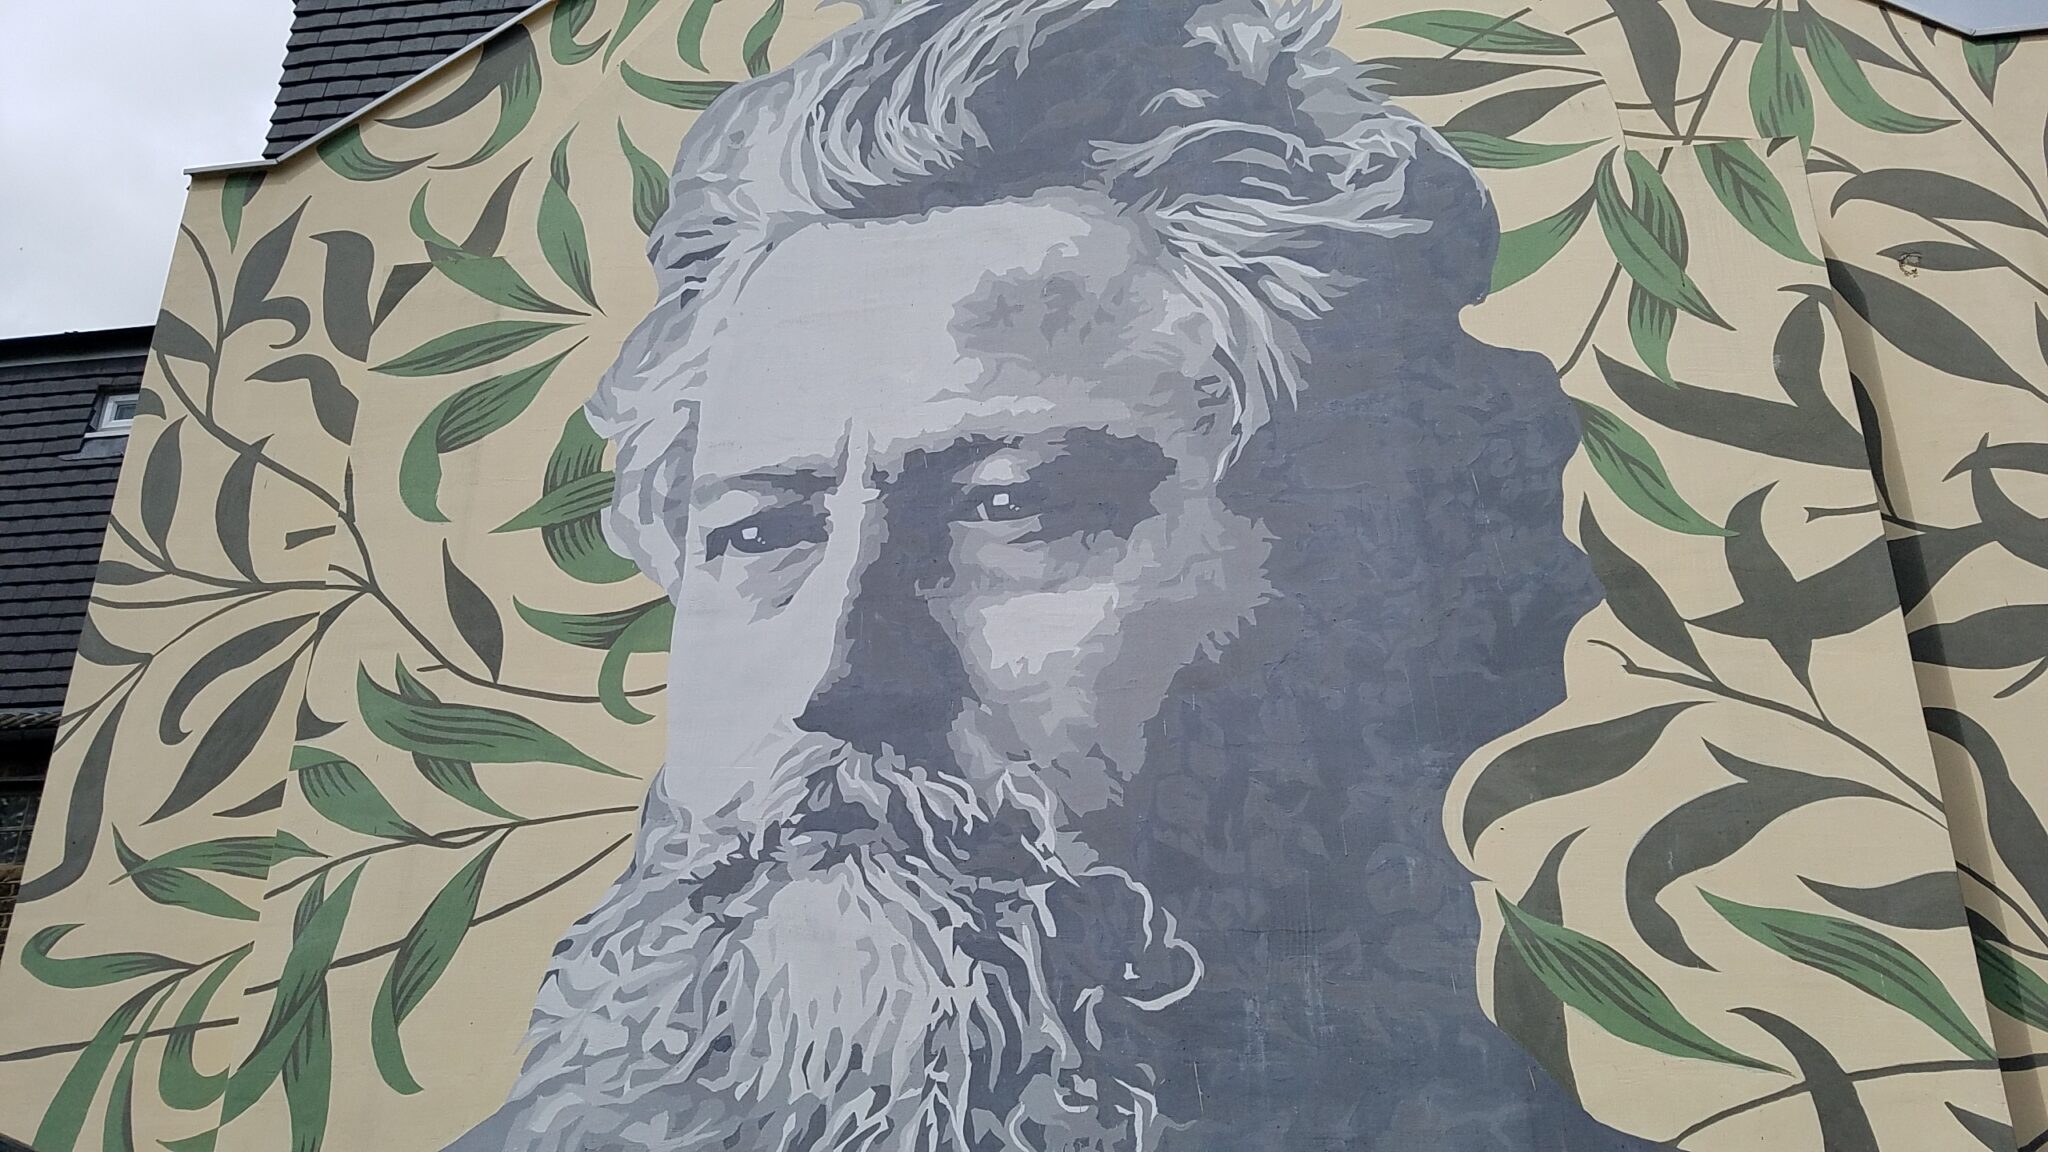 William Morris painted on the side of a building in Walthamstow London